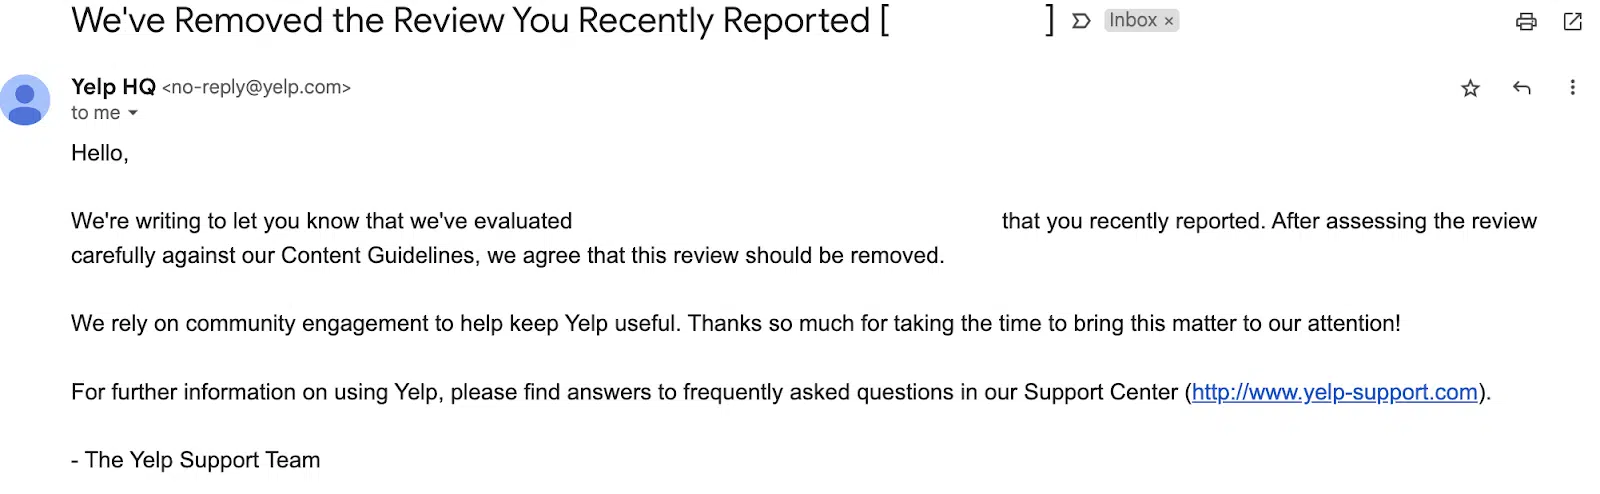 Yelp review removed email